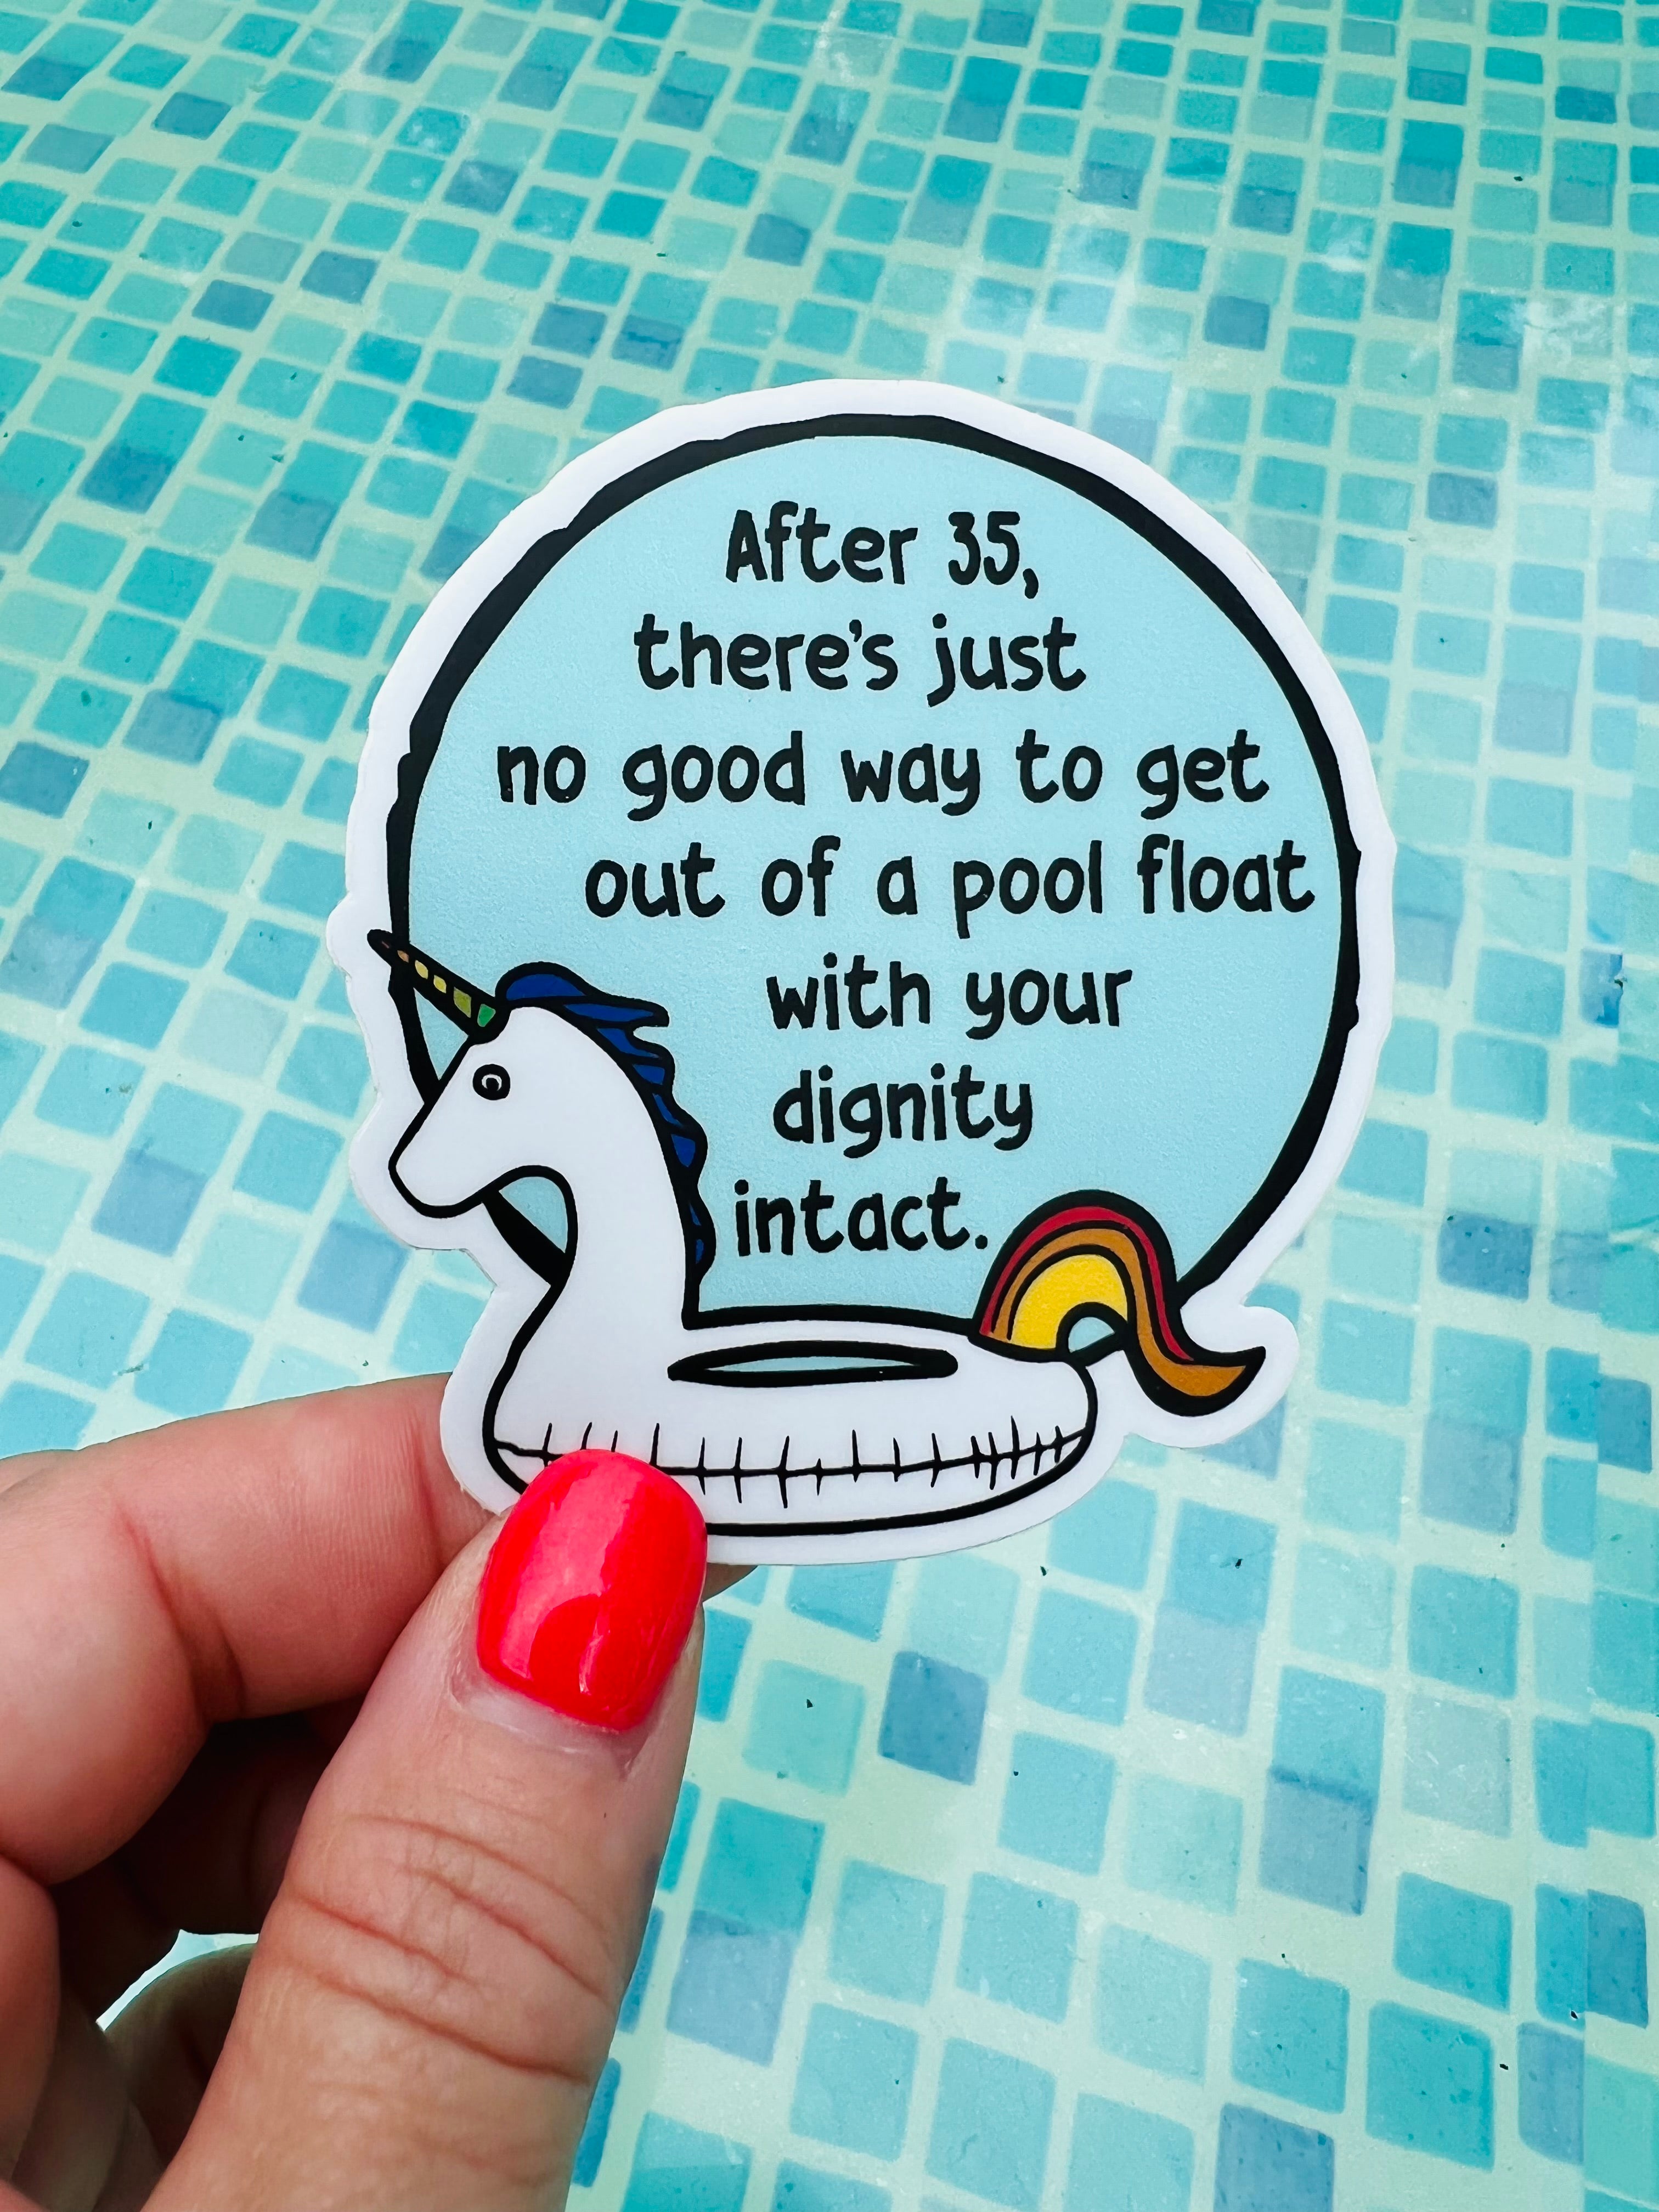 After 35, there's just no good way to get out of a pool float with your dignity intact. vinyl stickers